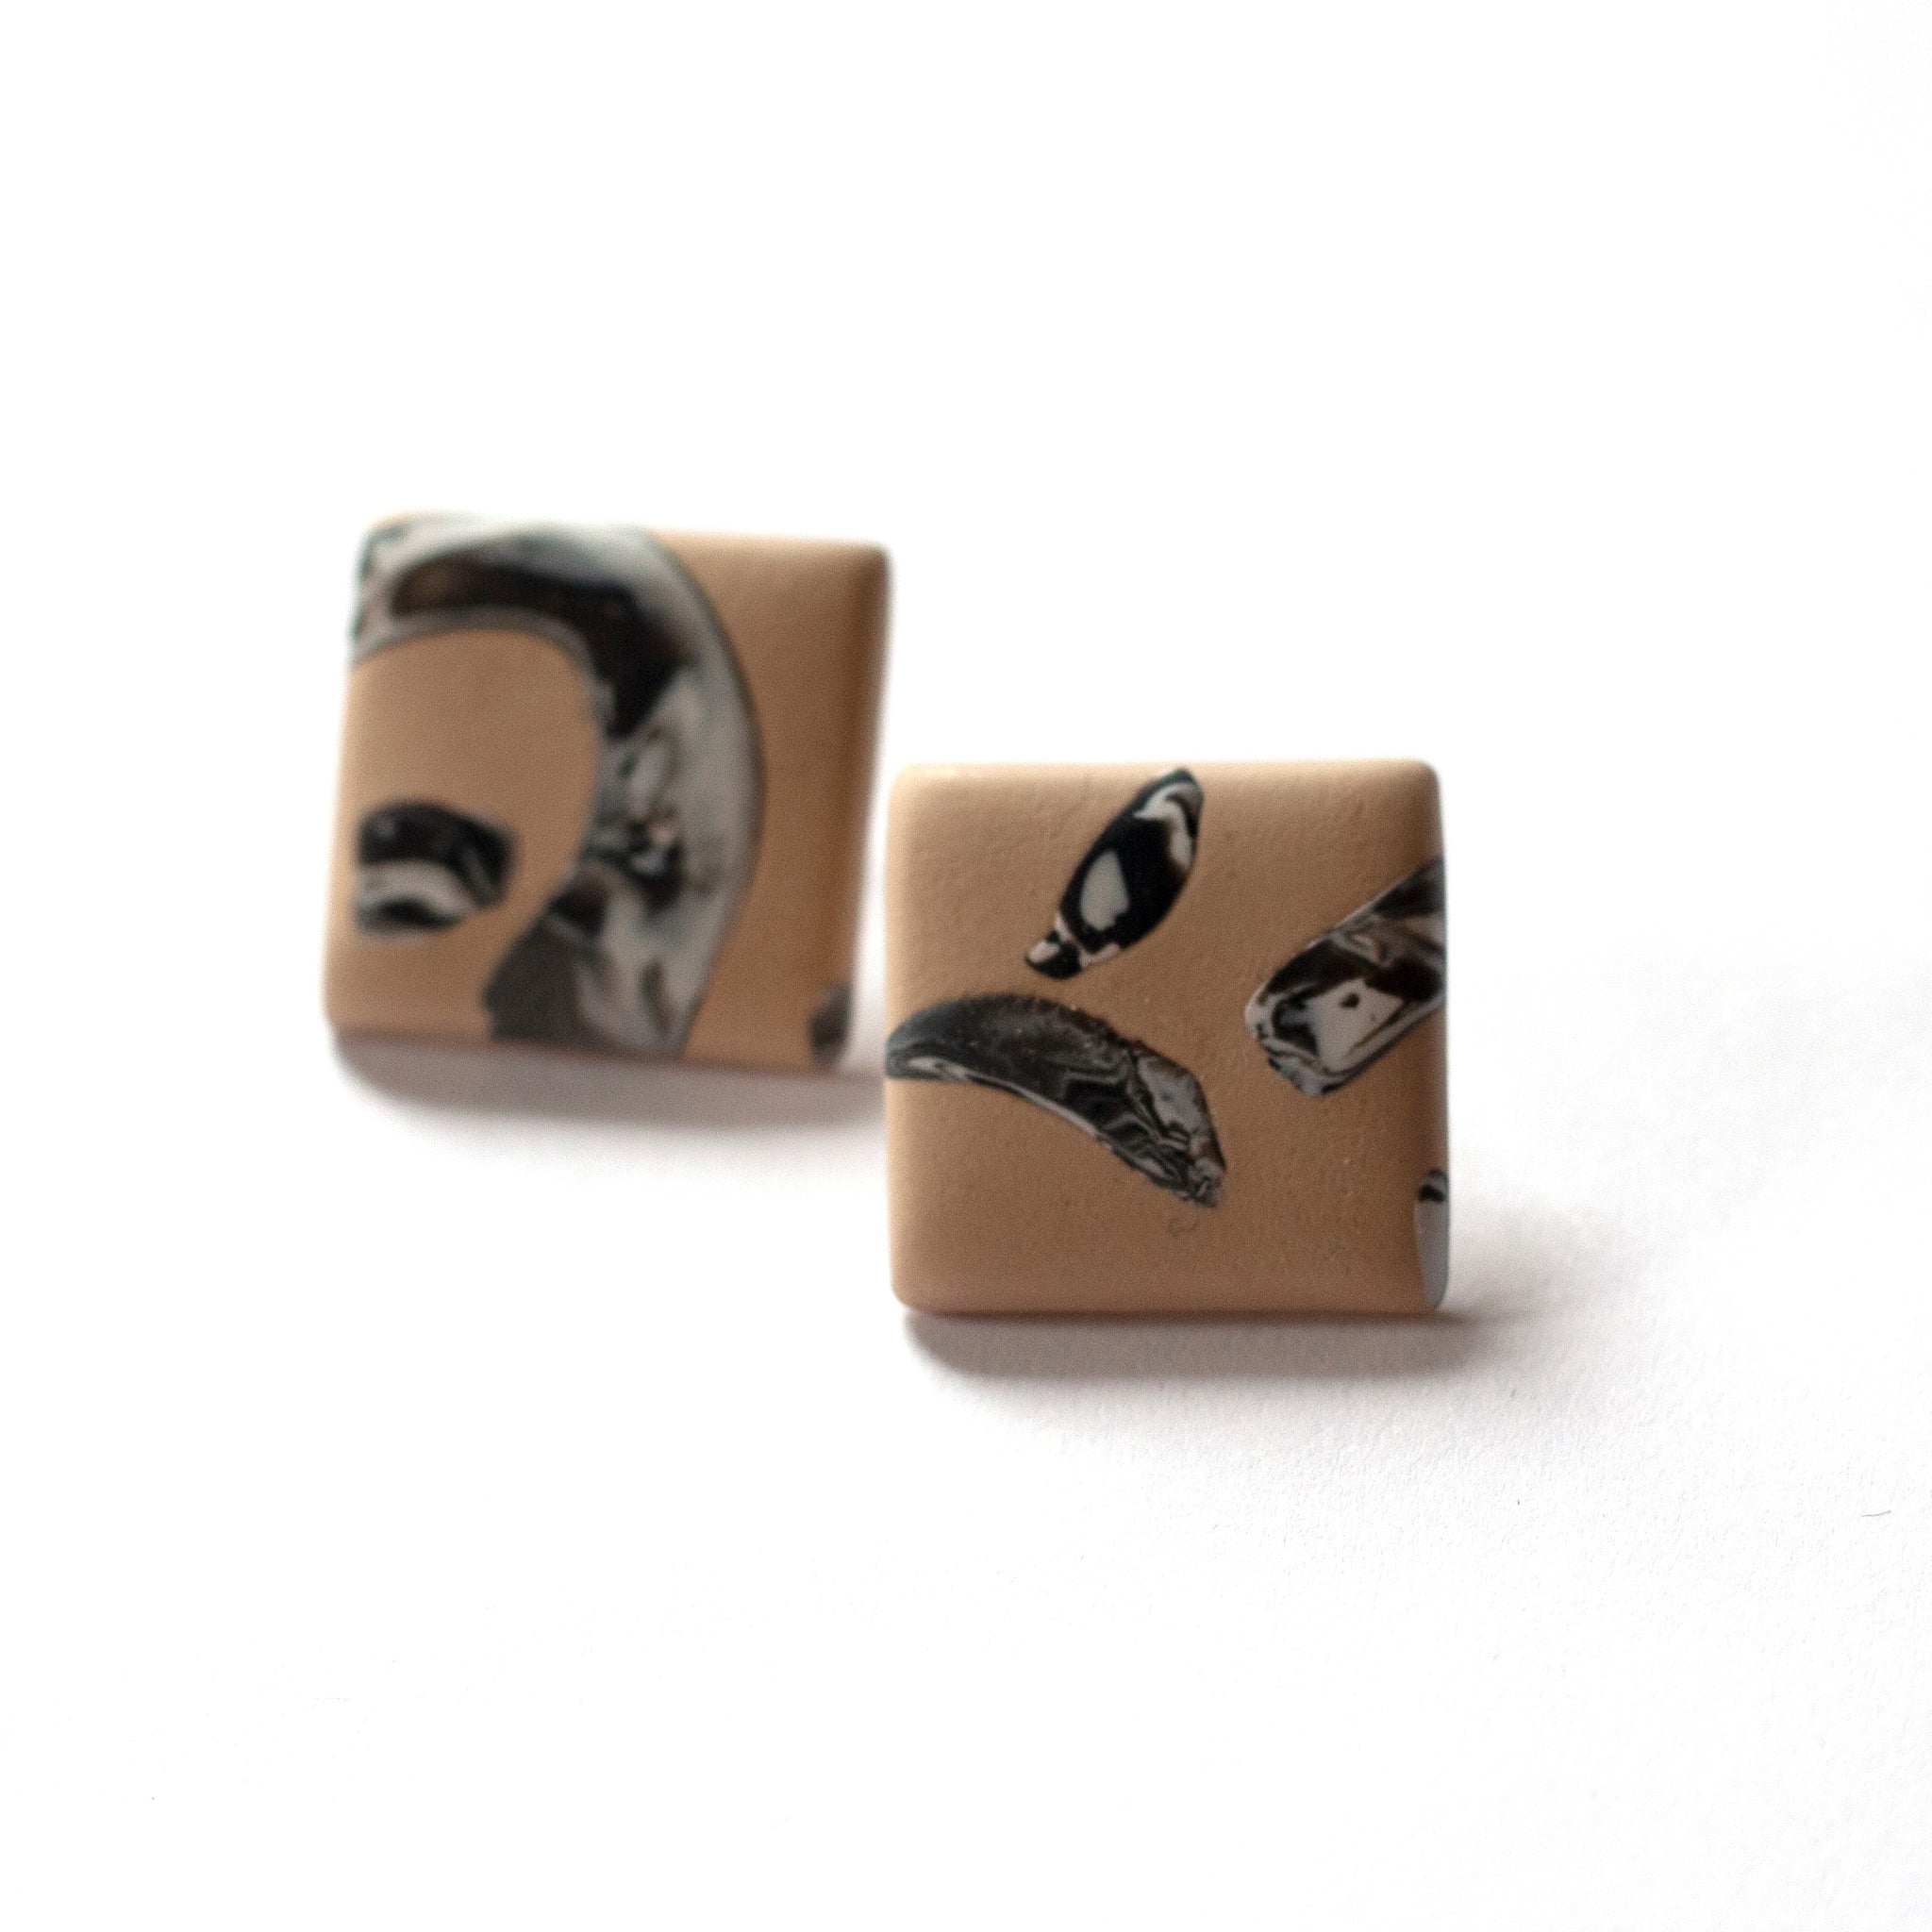 Clay Pigeon - Polymer Clay Square Stud Earrings (ksta55)